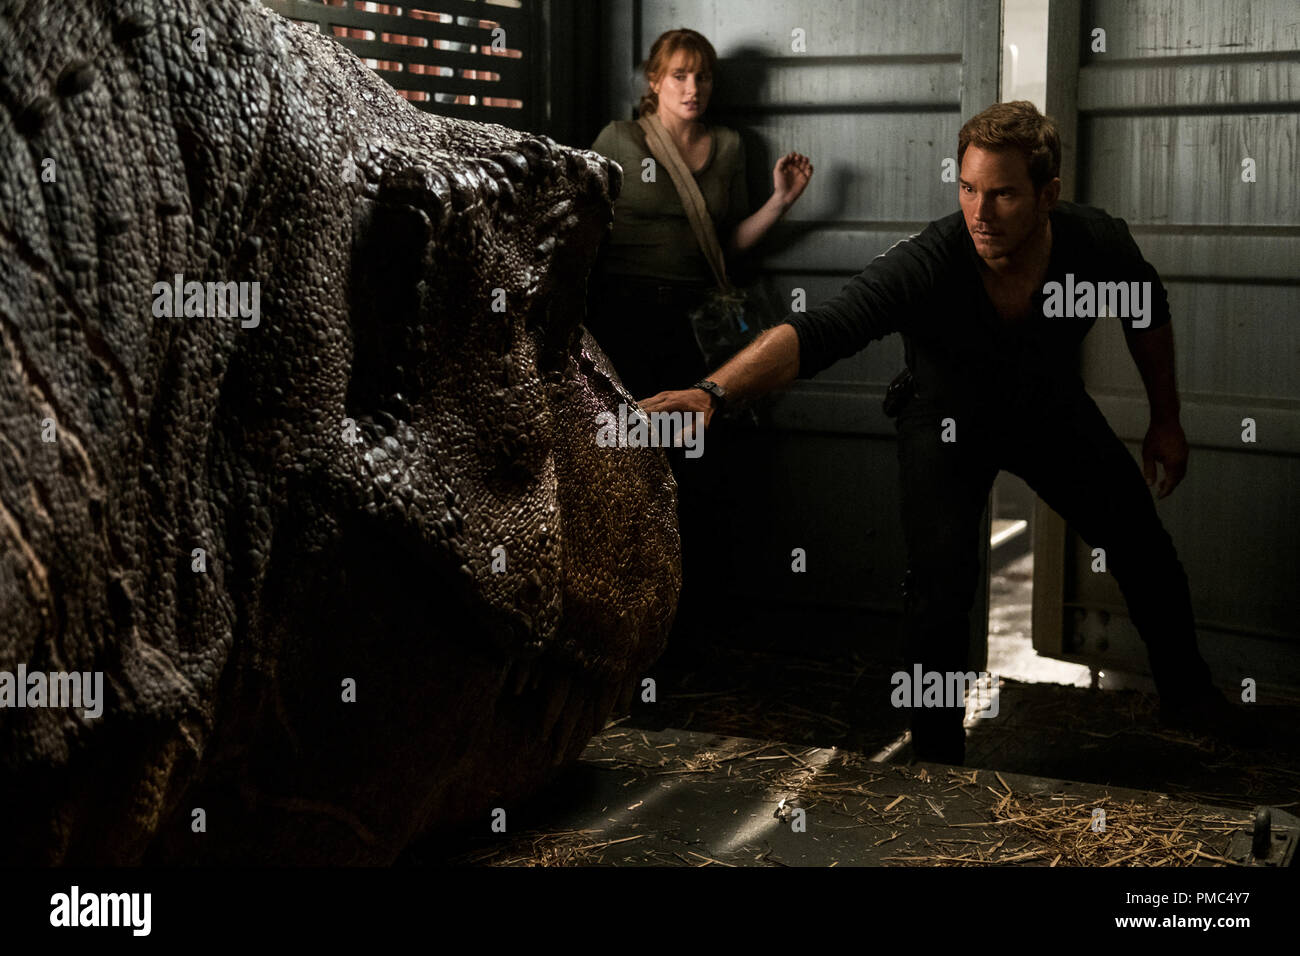 Claire (BRYCE DALLAS HOWARD) and Owen (CHRIS PRATT) try not to wake the mighty T. rex in 'Jurassic World: Fallen Kingdom.'  When the island's dormant volcano begins roaring to life, Owen and Claire mount a campaign to rescue the remaining dinosaurs from this extinction-level event.  Welcome to 'Jurassic World: Fallen Kingdom.' (2018) Universal Stock Photo